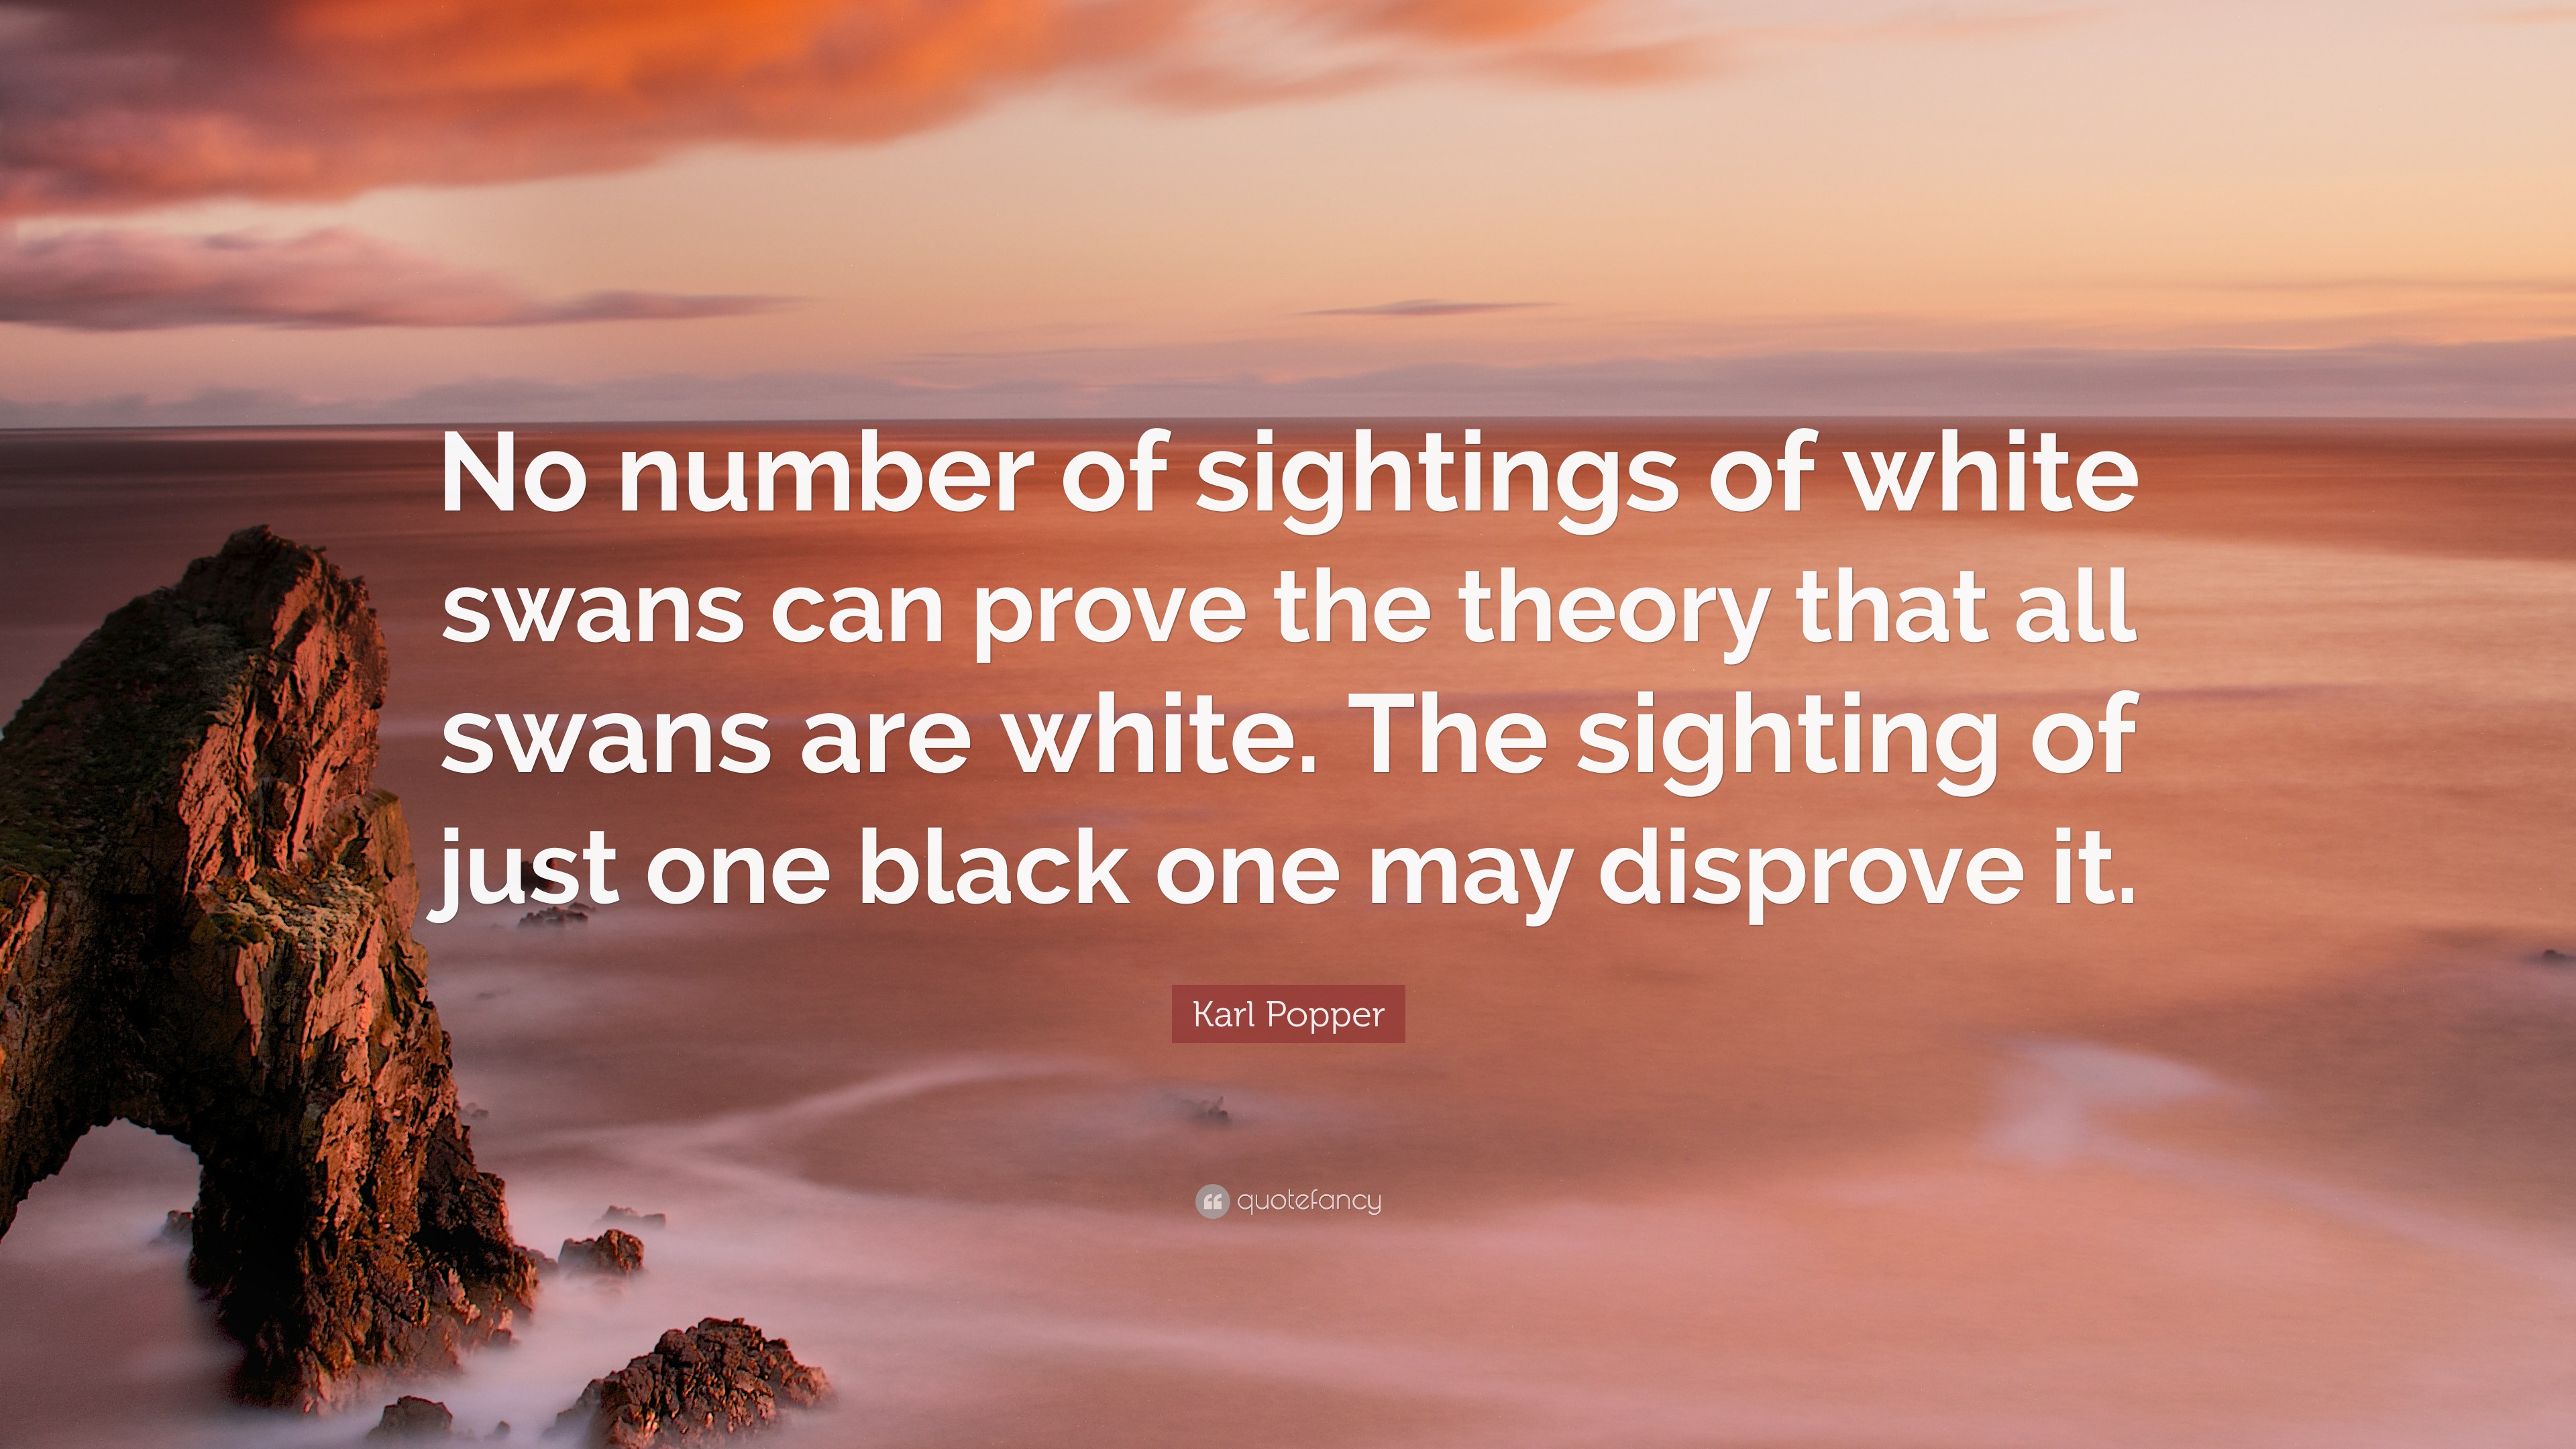 Hilse markedsføring ubrugt Karl Popper Quote: “No number of sightings of white swans can prove the  theory that all swans are white. The sighting of just one black one ...”